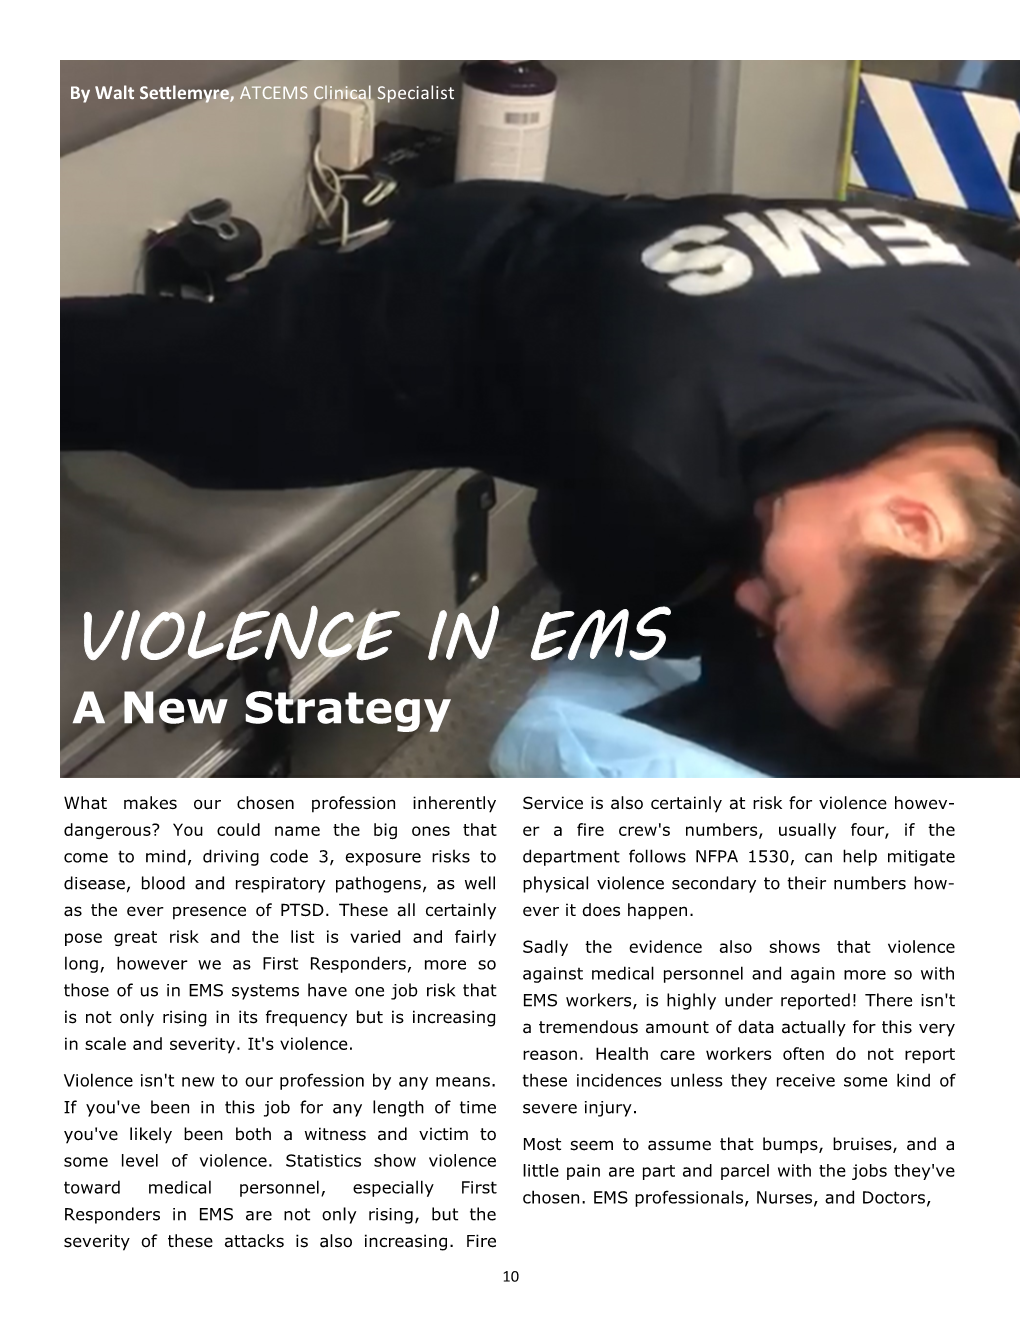 VIOLENCE in EMS a New Strategy